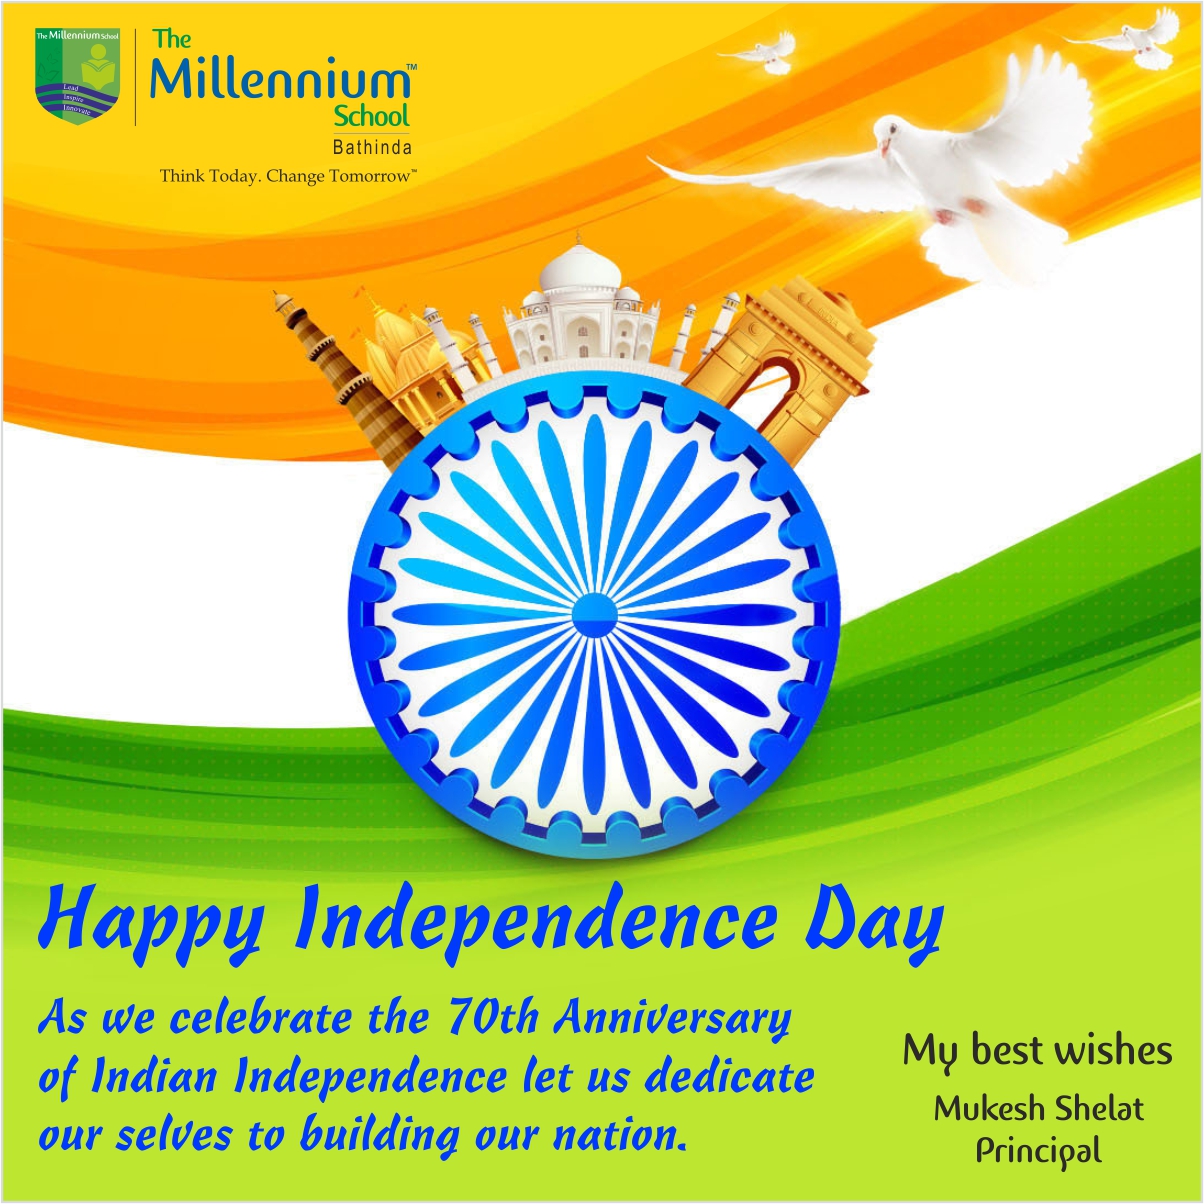 TMS-Bathinda wishes you a Happy Independence Day | The Millennium ...